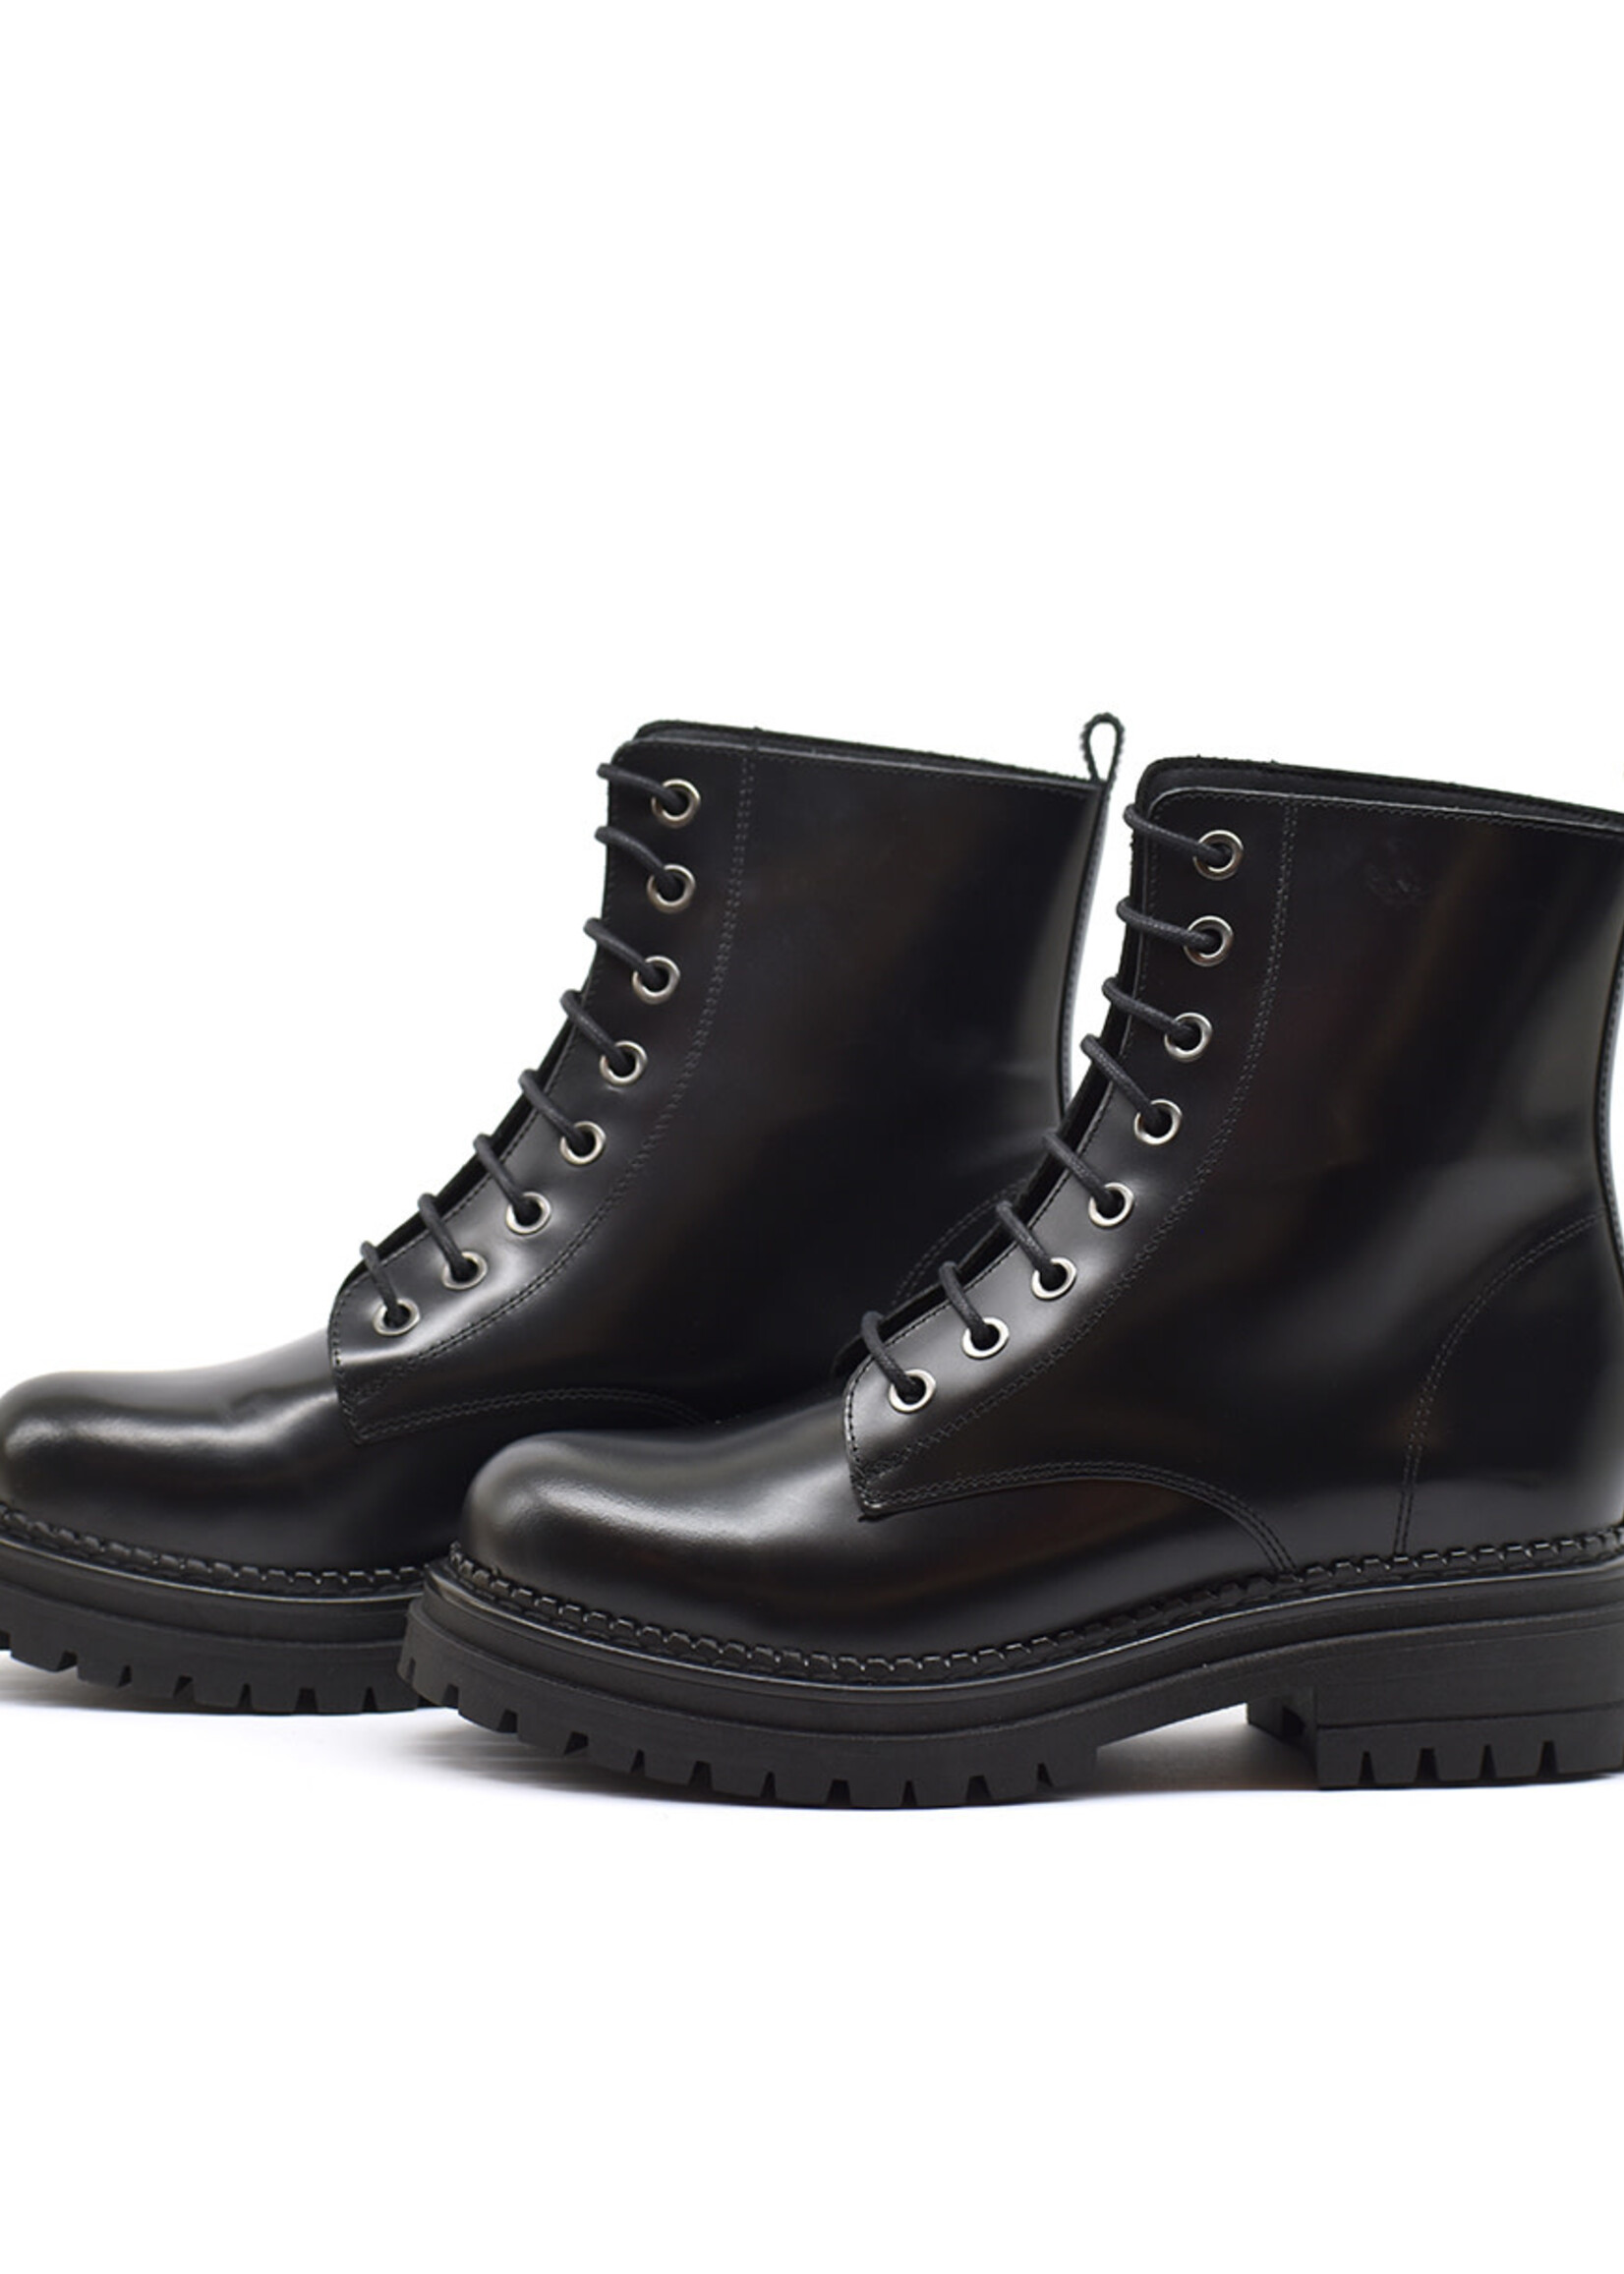 Military Boots  A1177 London Black